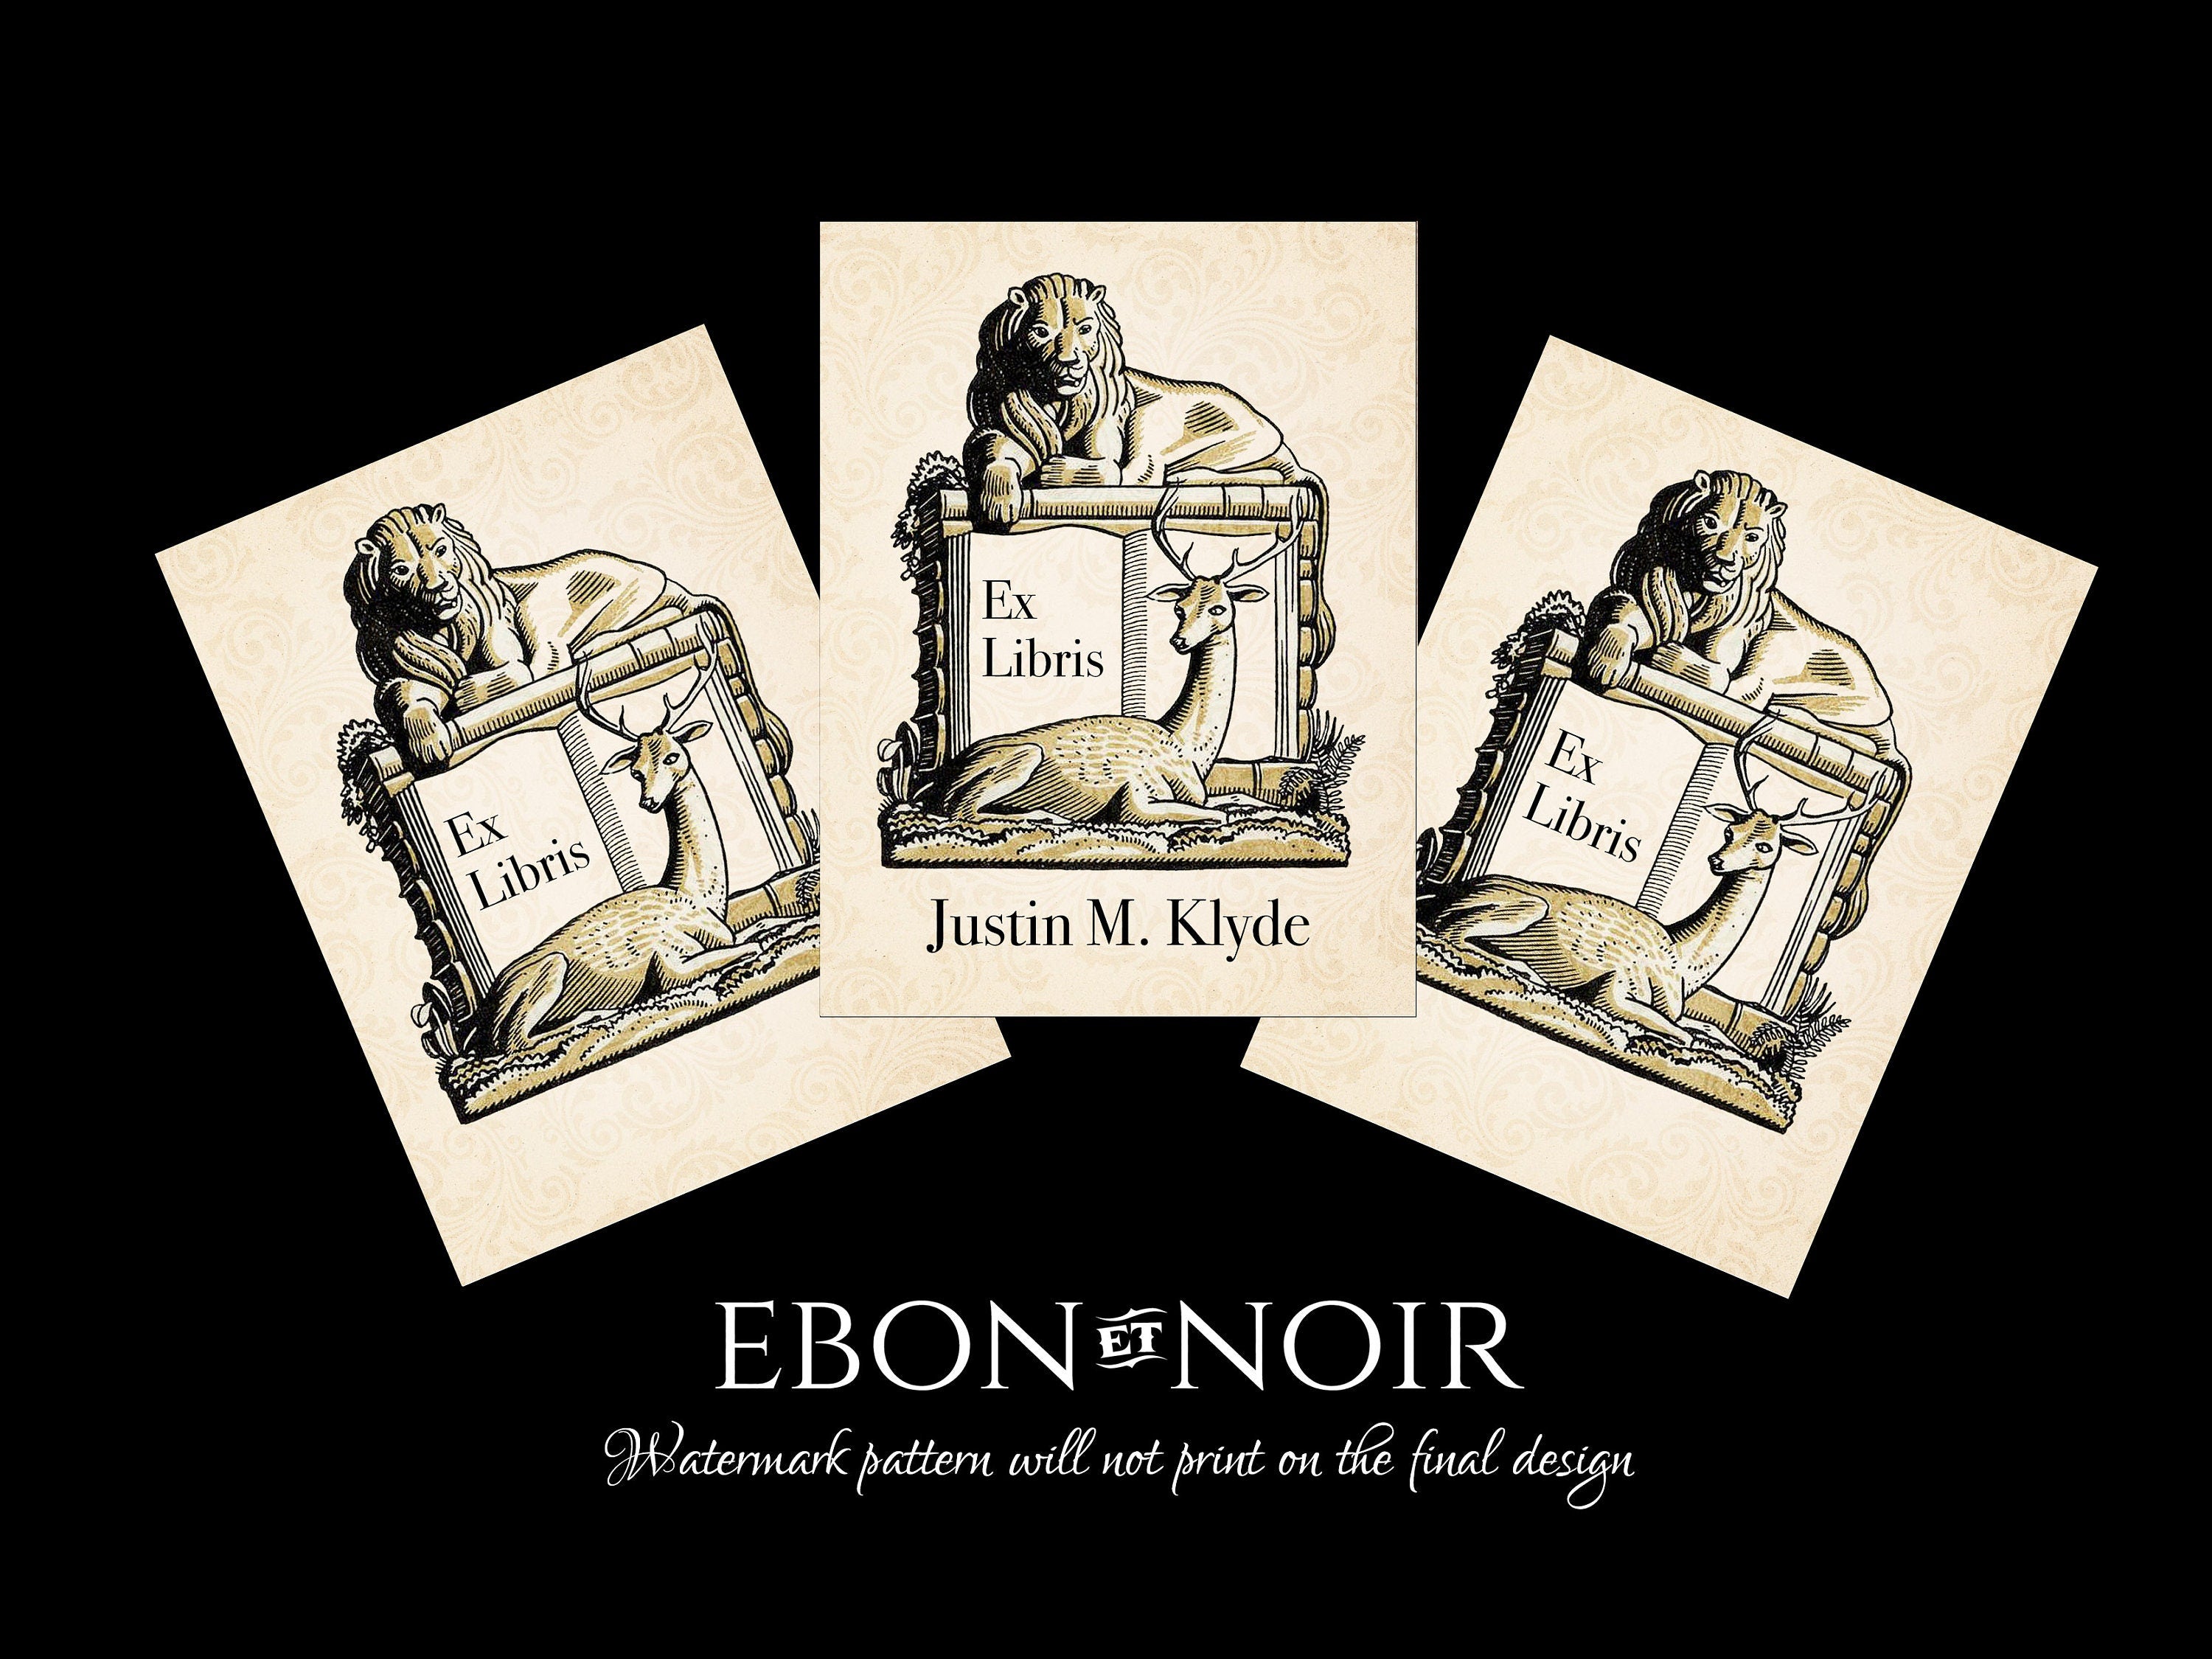 Lion and Faun by Rockwell Kent, Personalized Ex-Libris Bookplates, Crafted on Traditional Gummed Paper, 3in x 4in, Set of 30